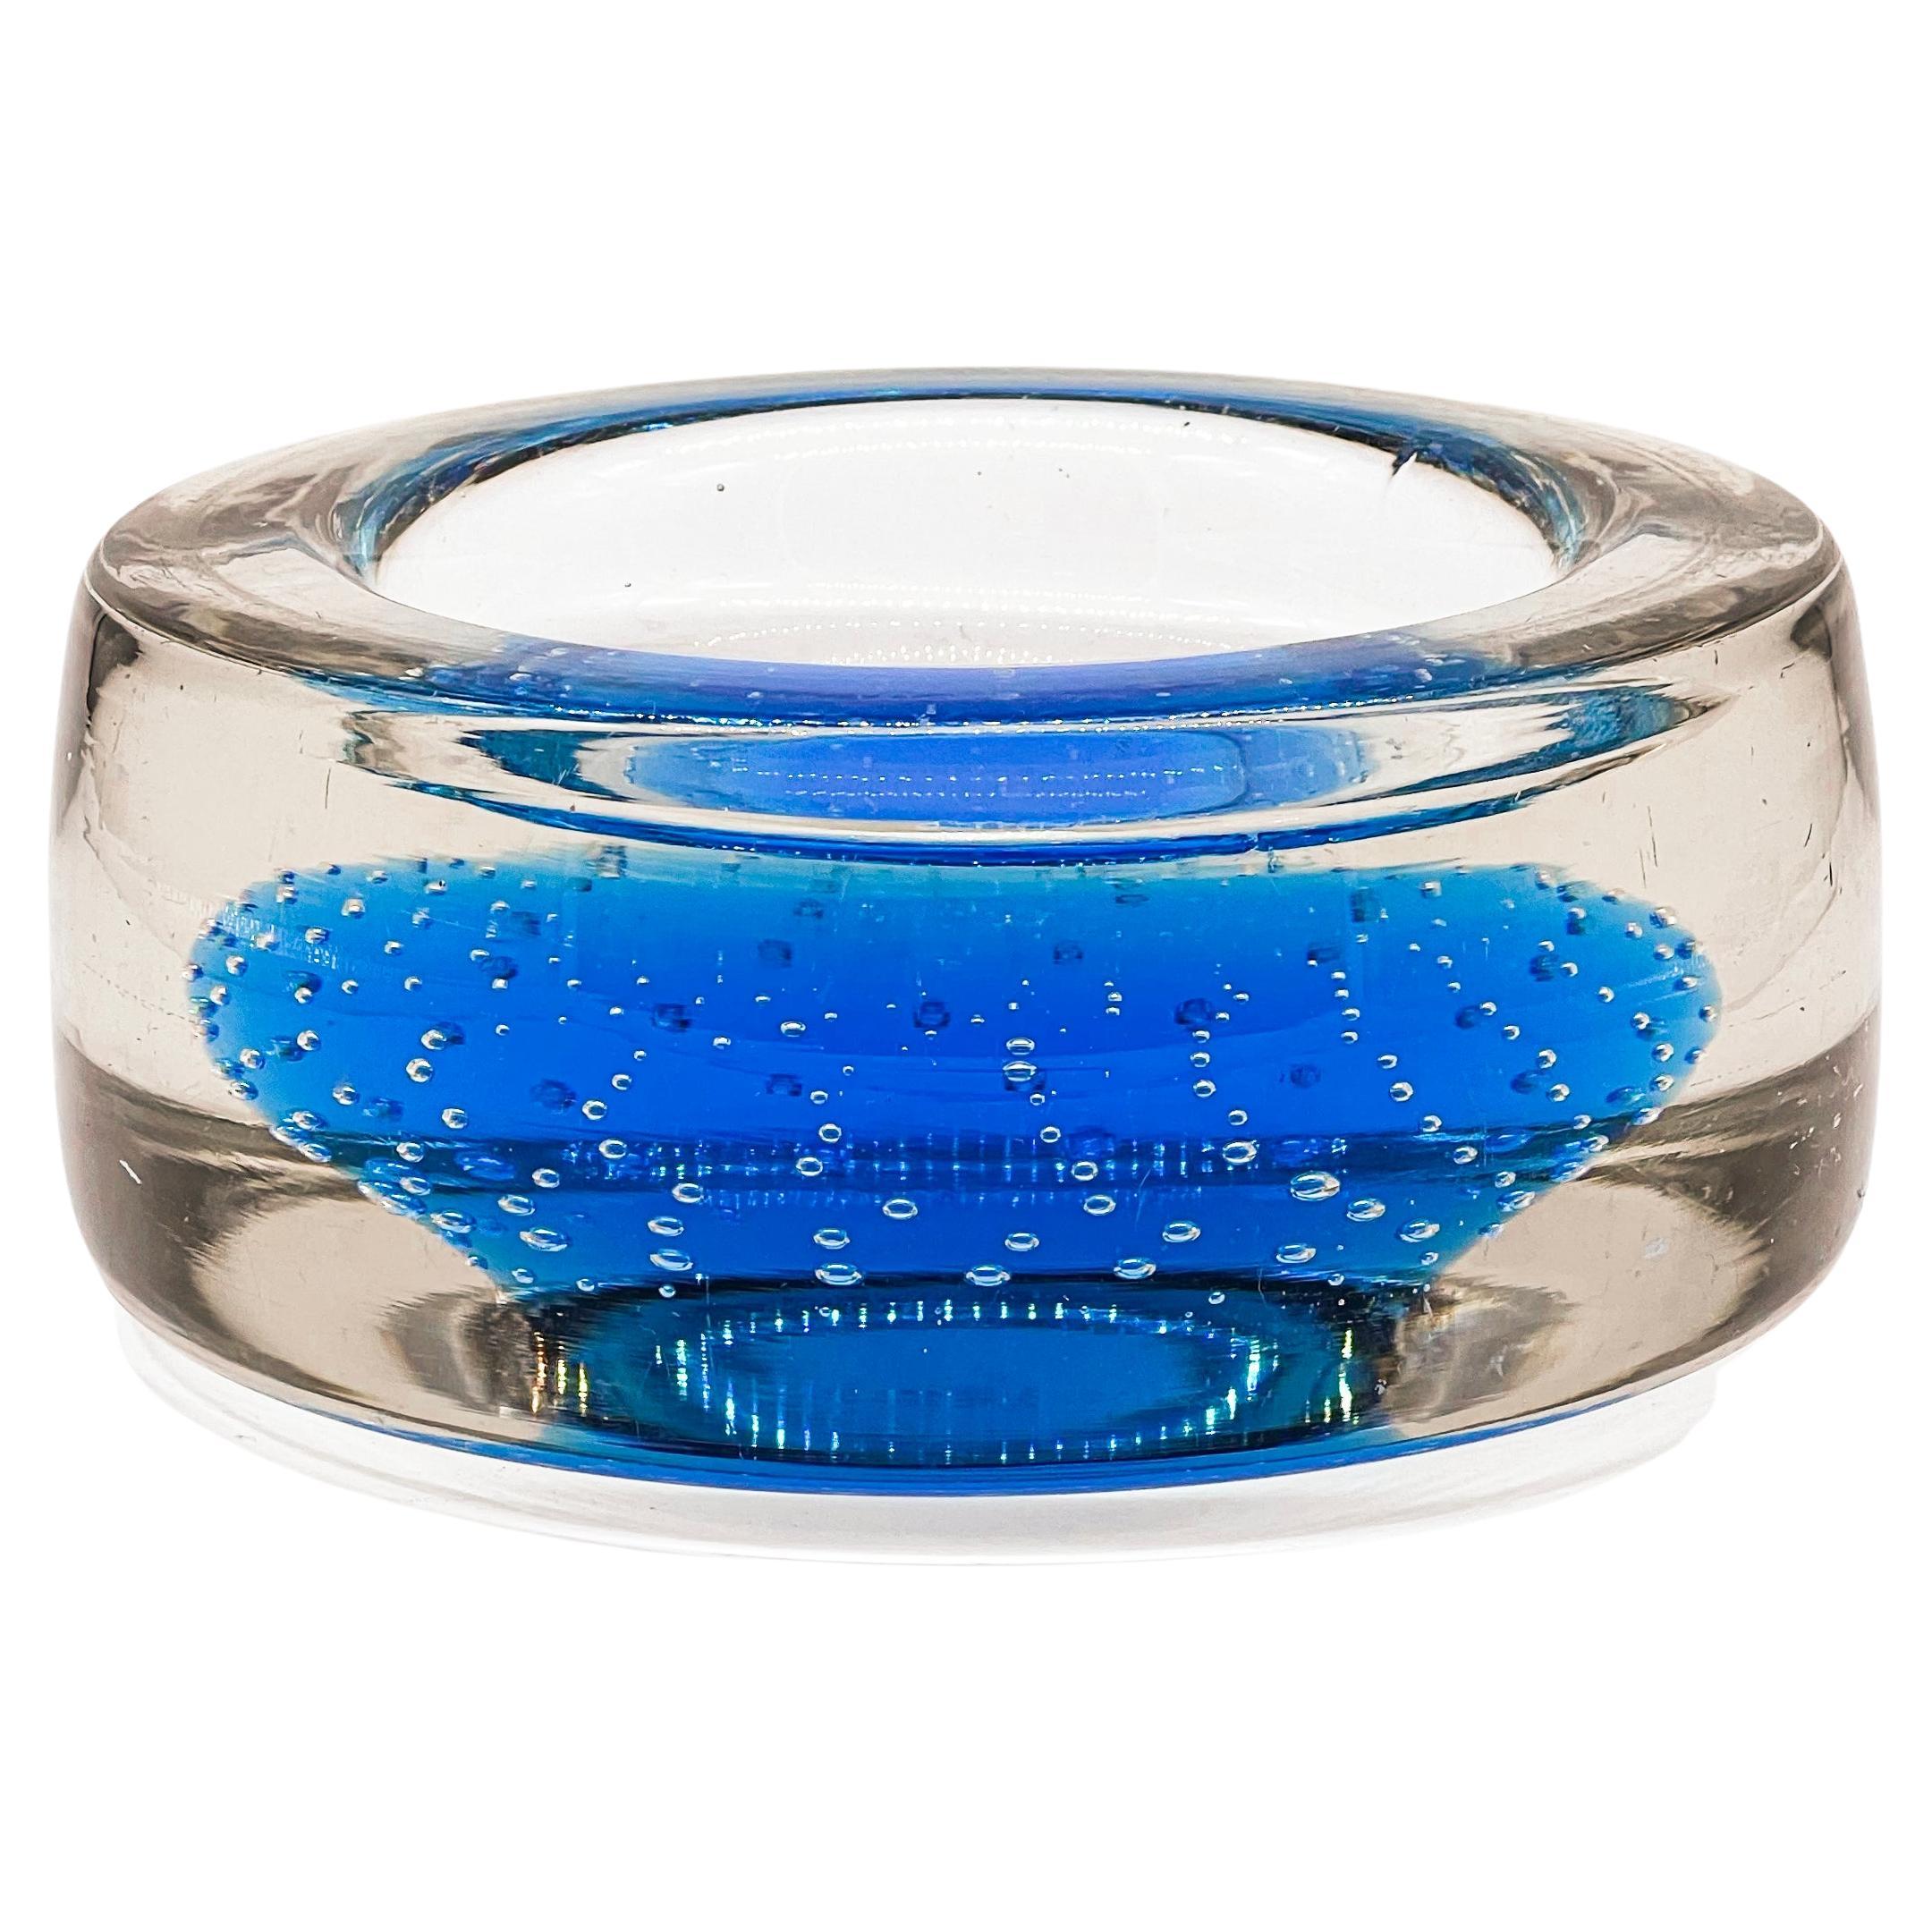 Seguso bowl, blue and clear Sommerso Murano glass, decorative sculpture For Sale